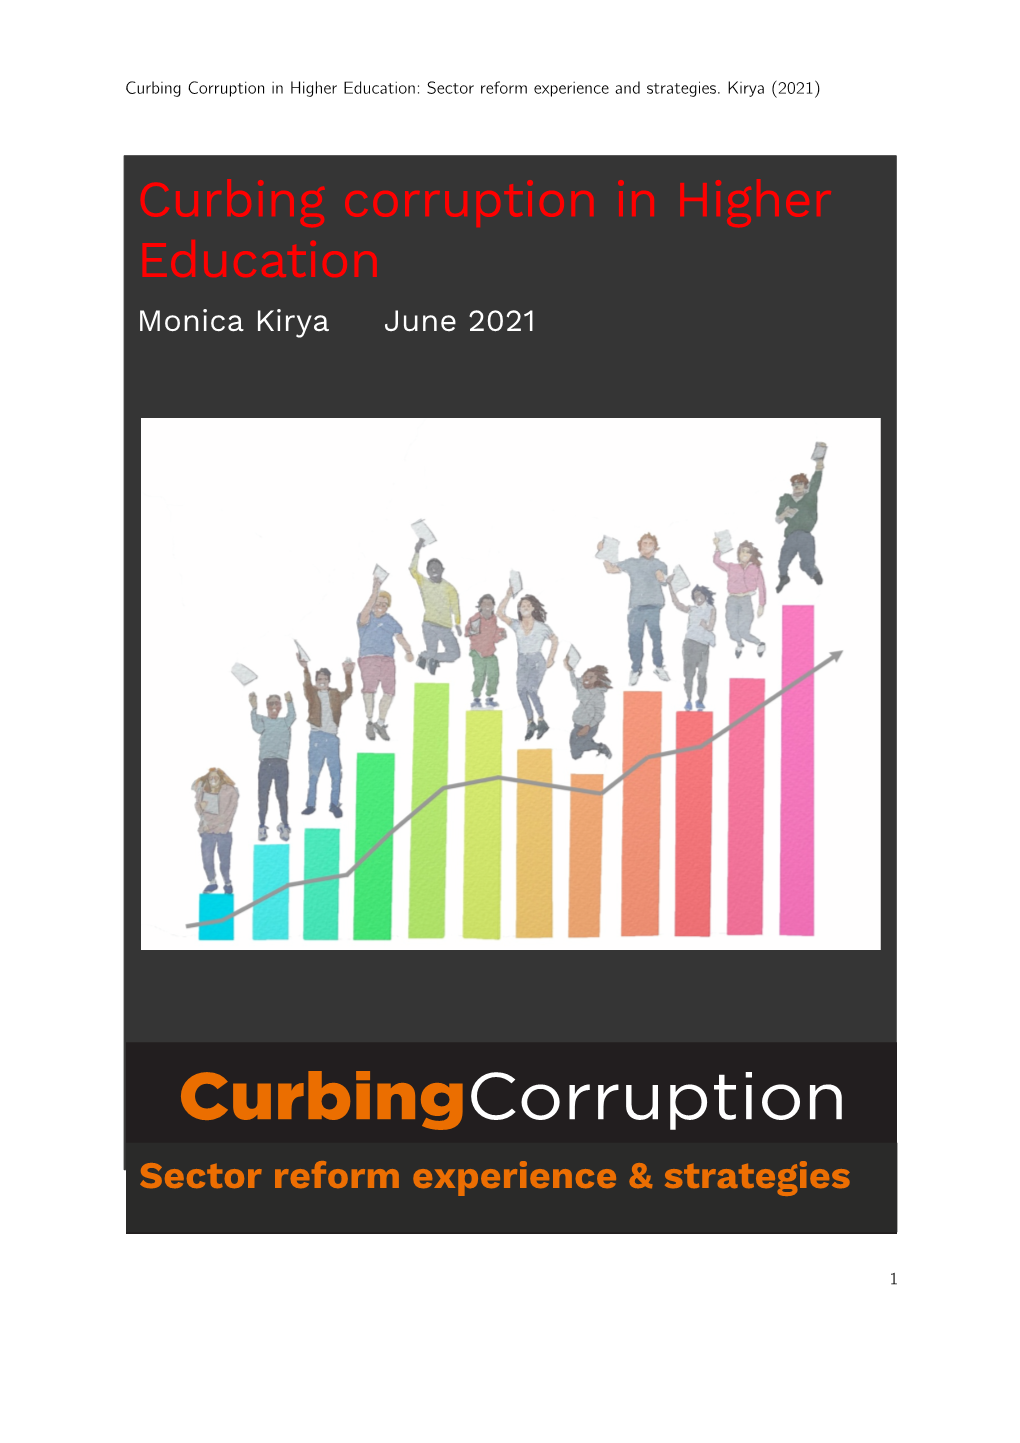 Curbing Corruption in Higher Education: Sector Reform Experience and Strategies